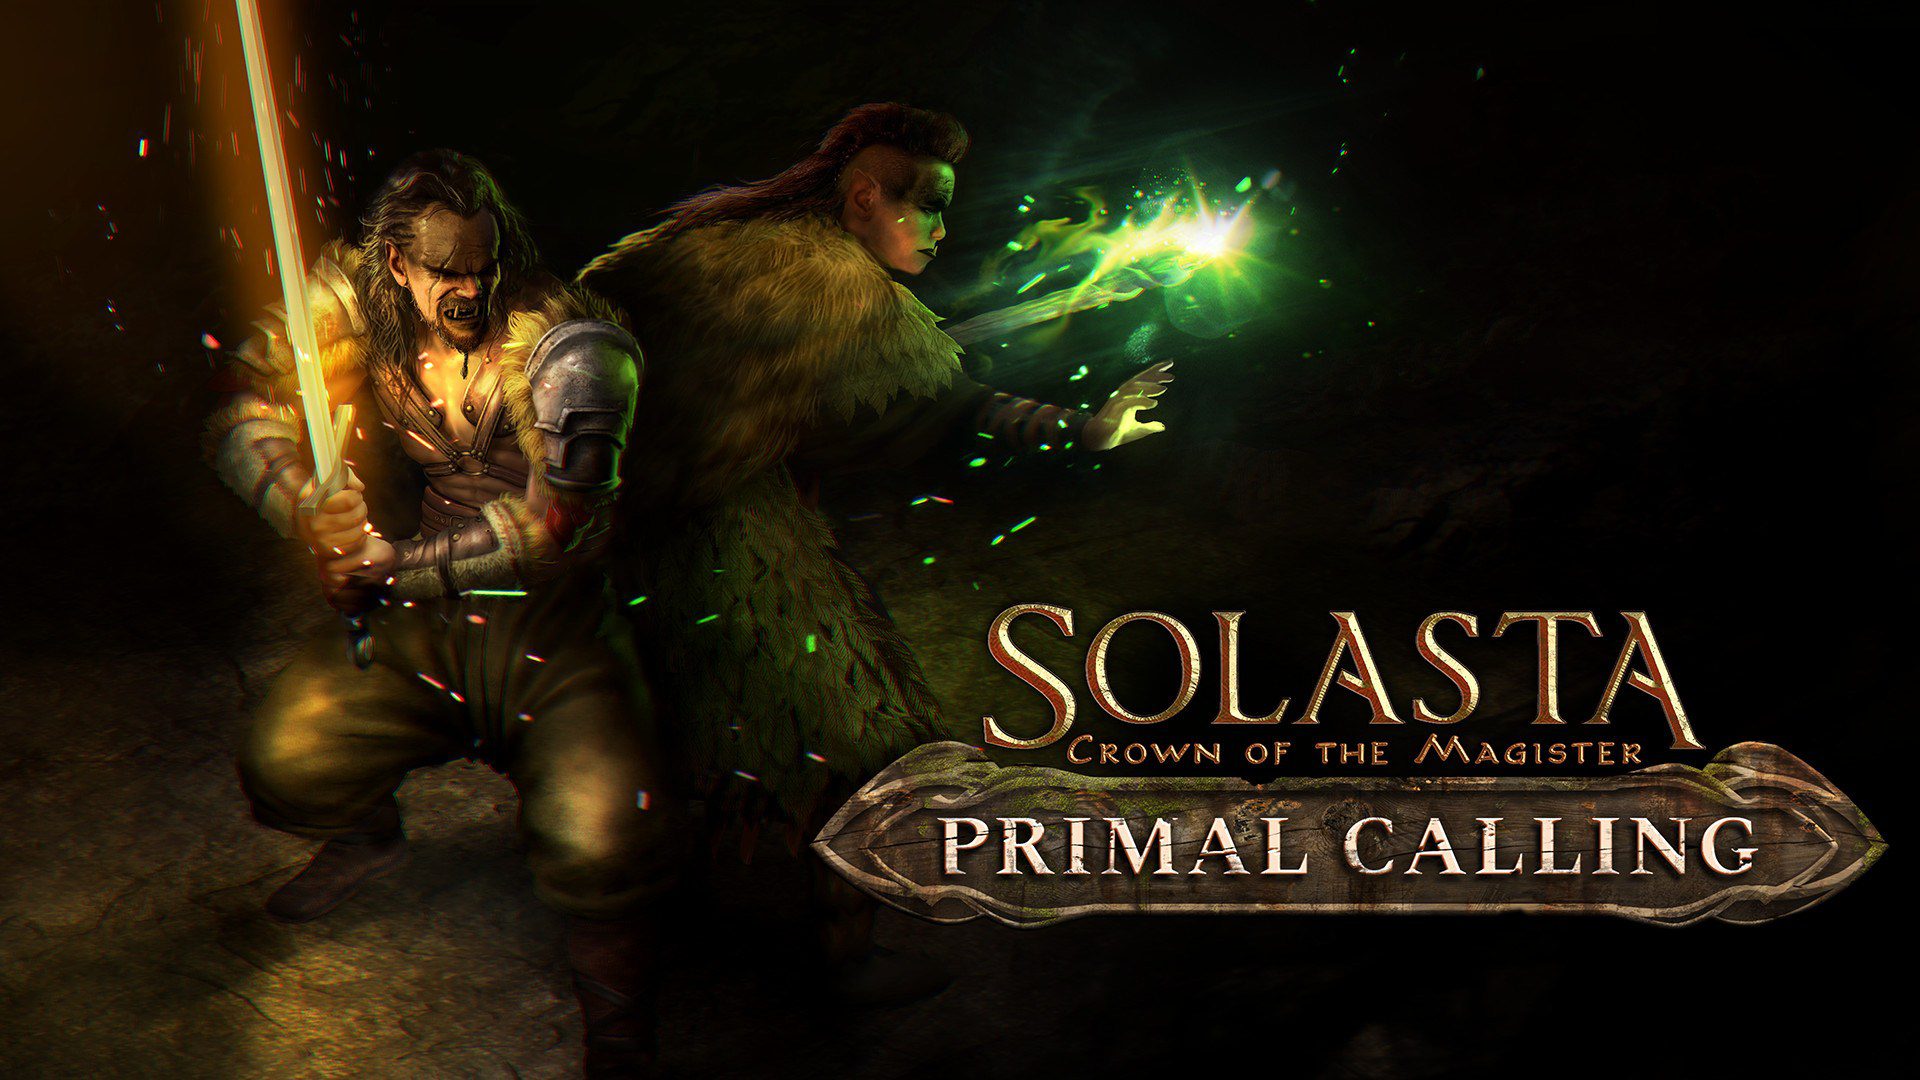 Solasta: Crown of the Magister - Primal Calling DLC | Tactical Adventures